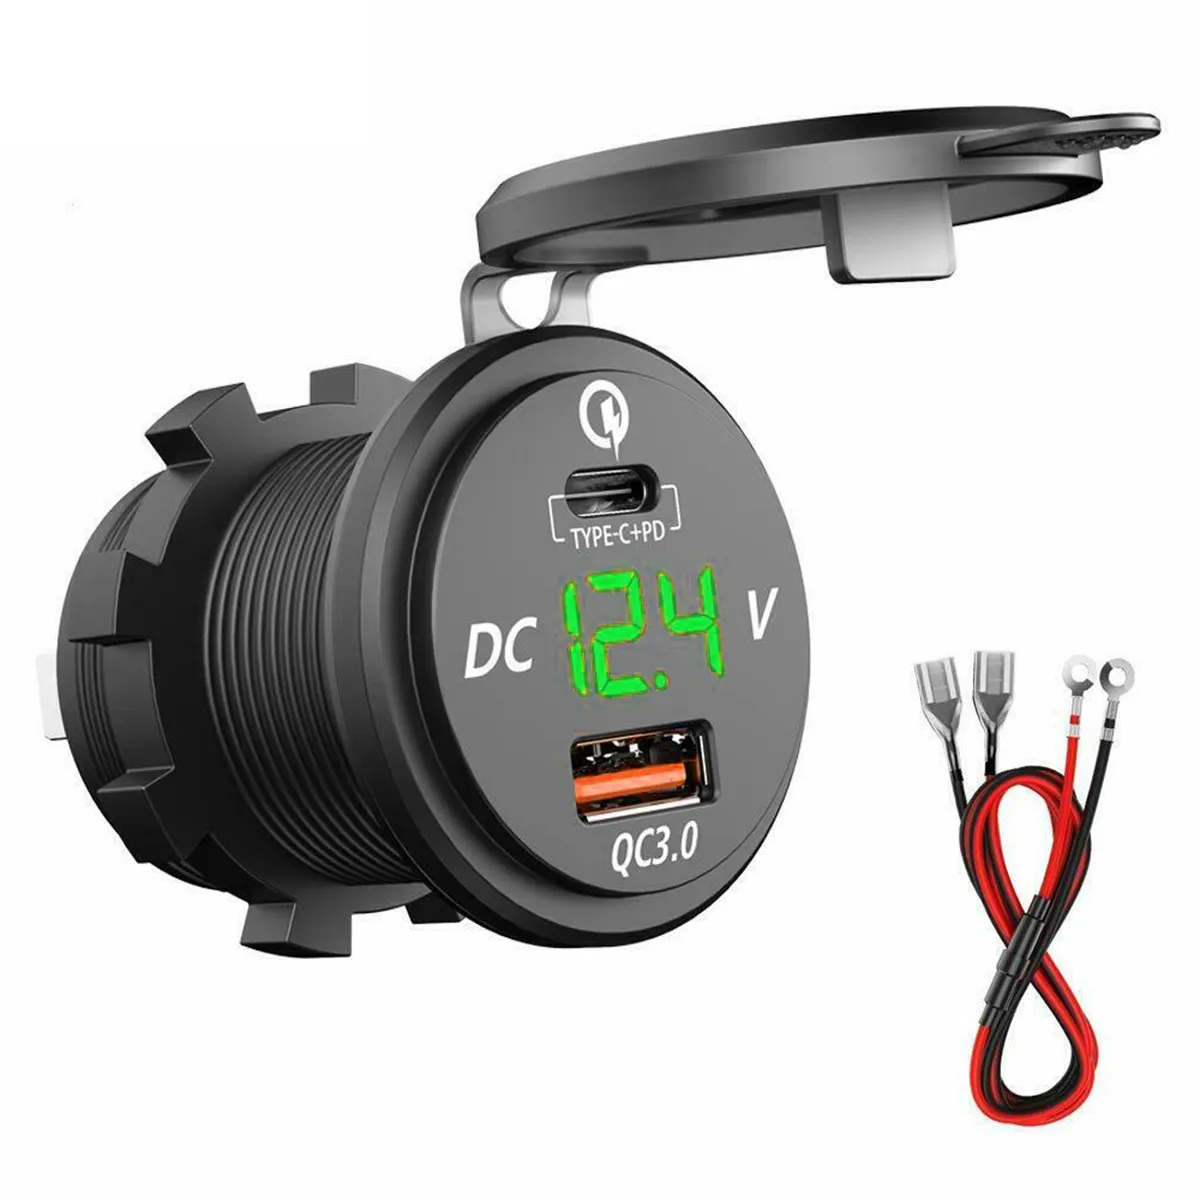 5V Red Blue Green Dual USB Charger Socket Adapter with LED Voltmeter waterproof dustproof cover for 12/24V Car Motorcycle boat